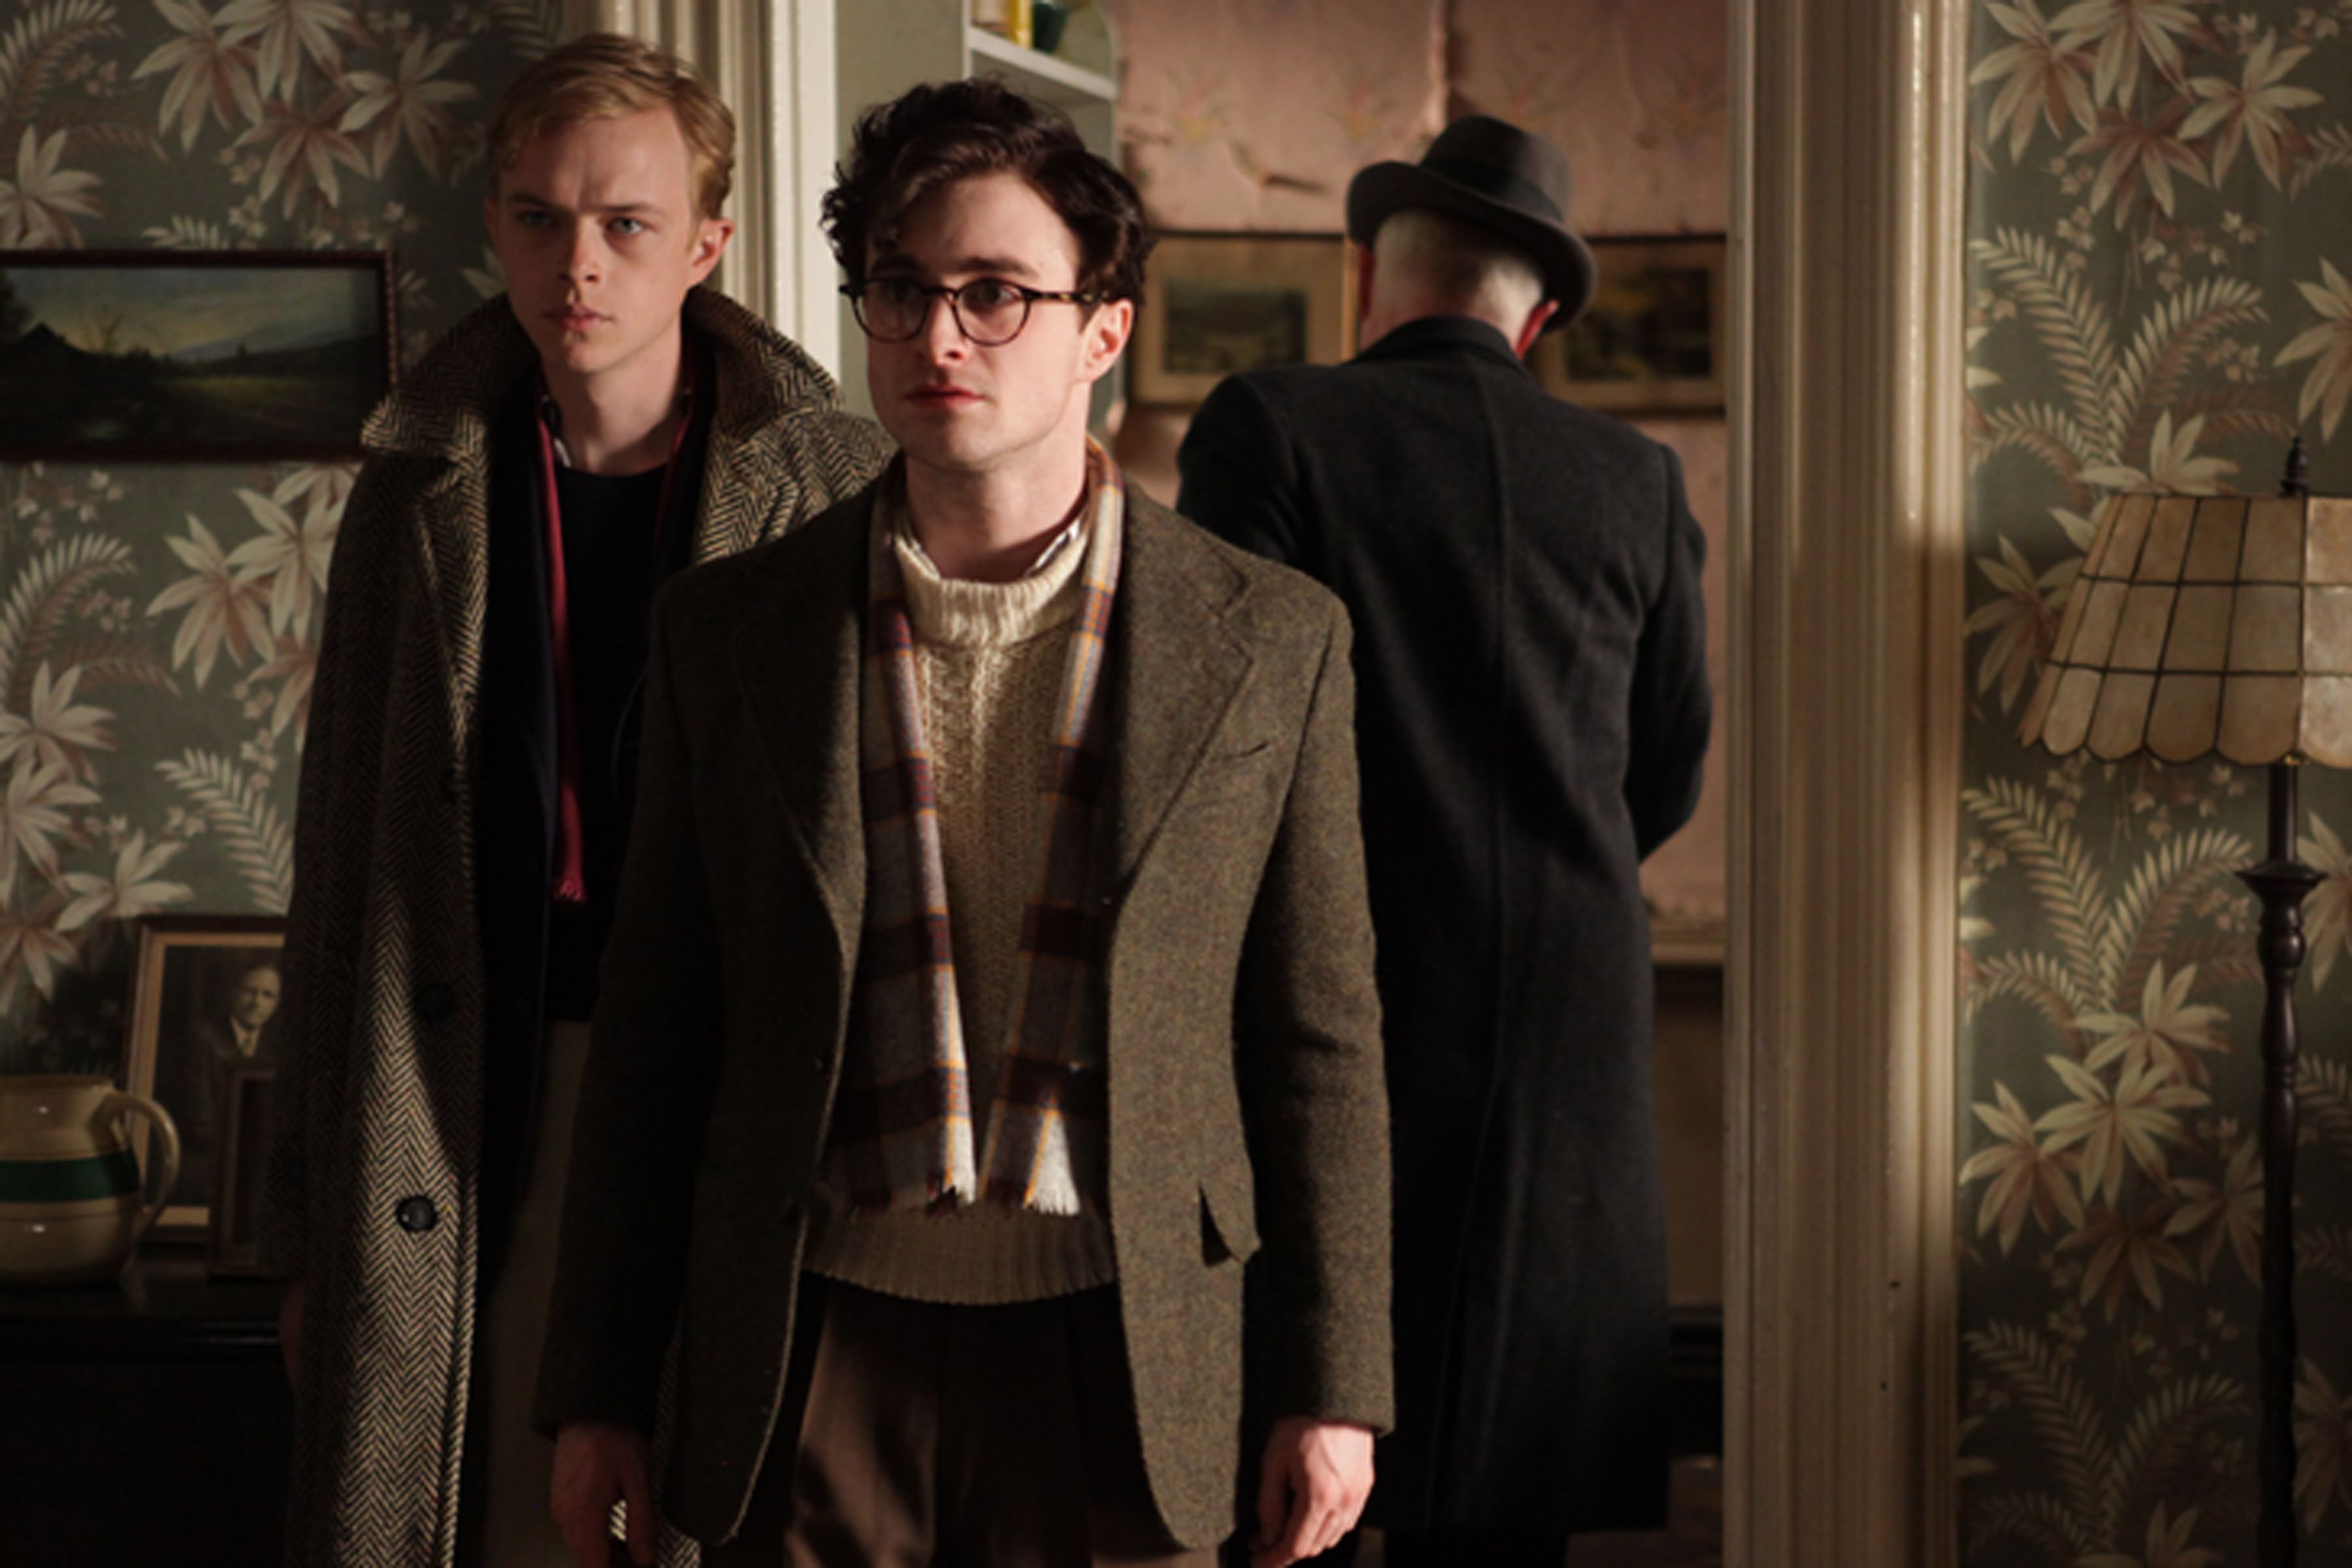 Kill Your Darlings Clip and Photo Featuring Daniel Radcliffe and Dane DeHaan